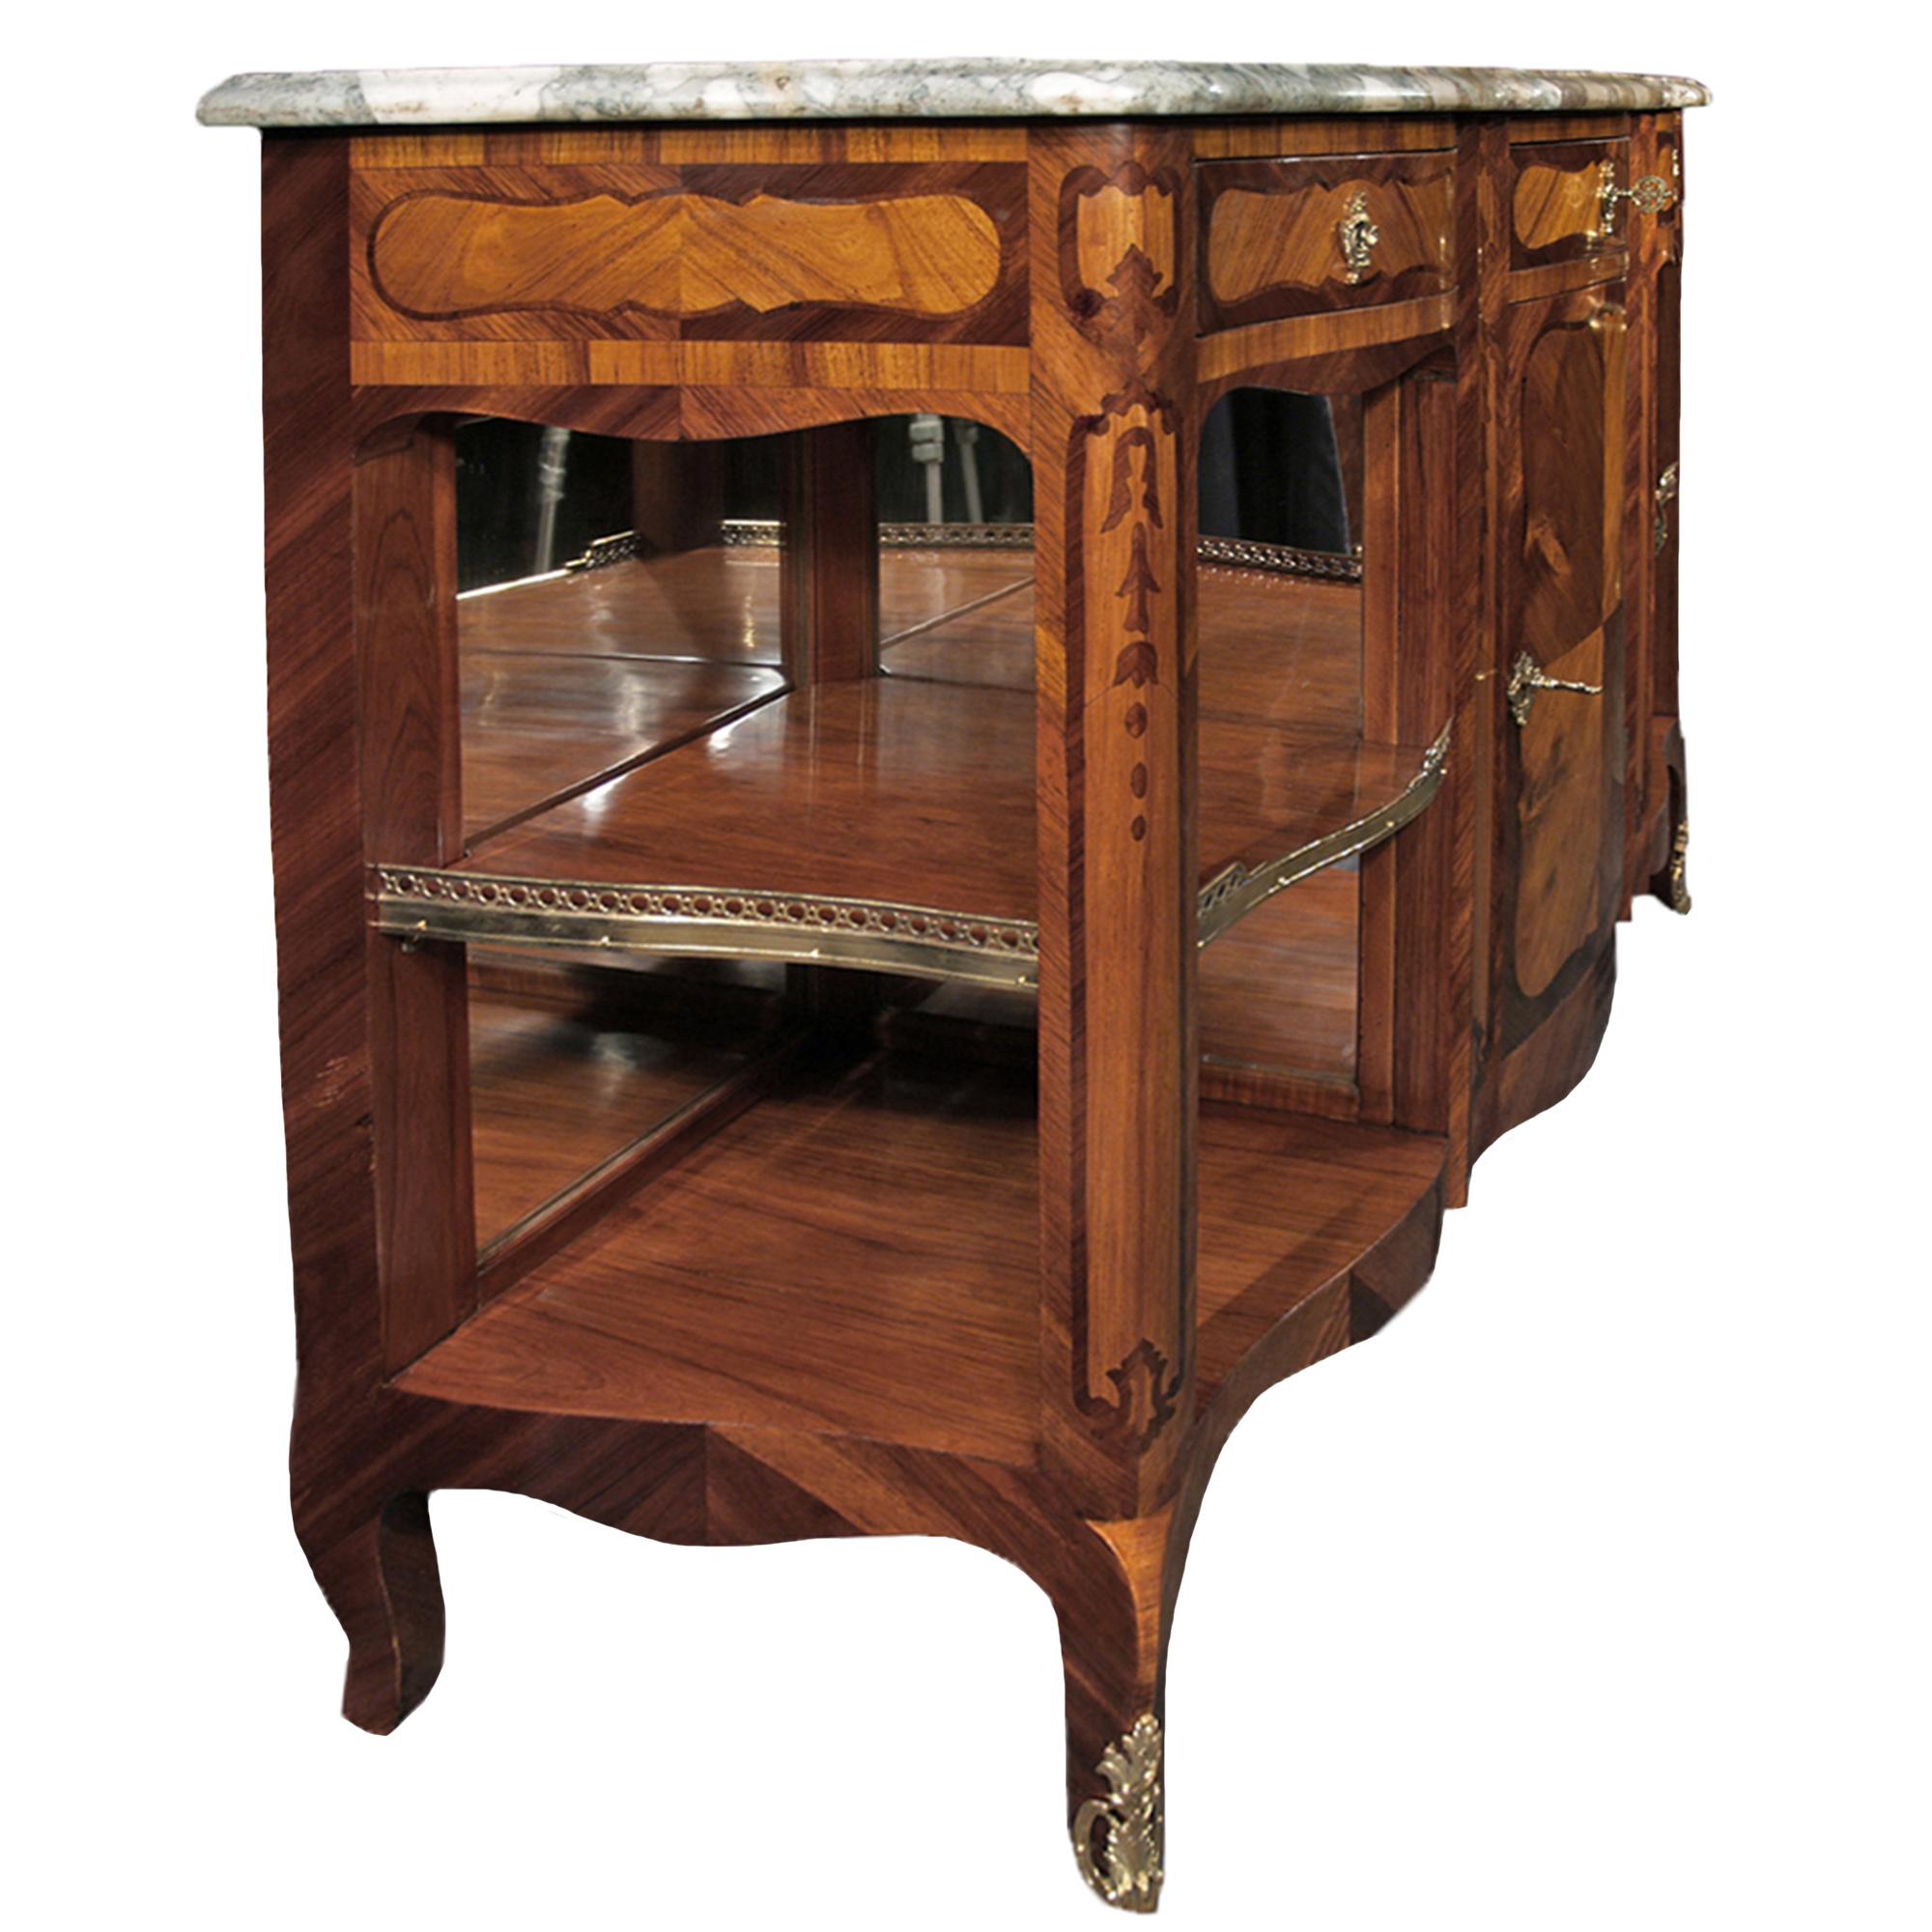 An elegant late 19th century French Louis XV st. tulipwood and kingwood buffet. The buffet is raised by cabriole legs and has an arbalest shaped front and bombee shaped sides. The scalloped shaped apron is below a central drawer with a quarter